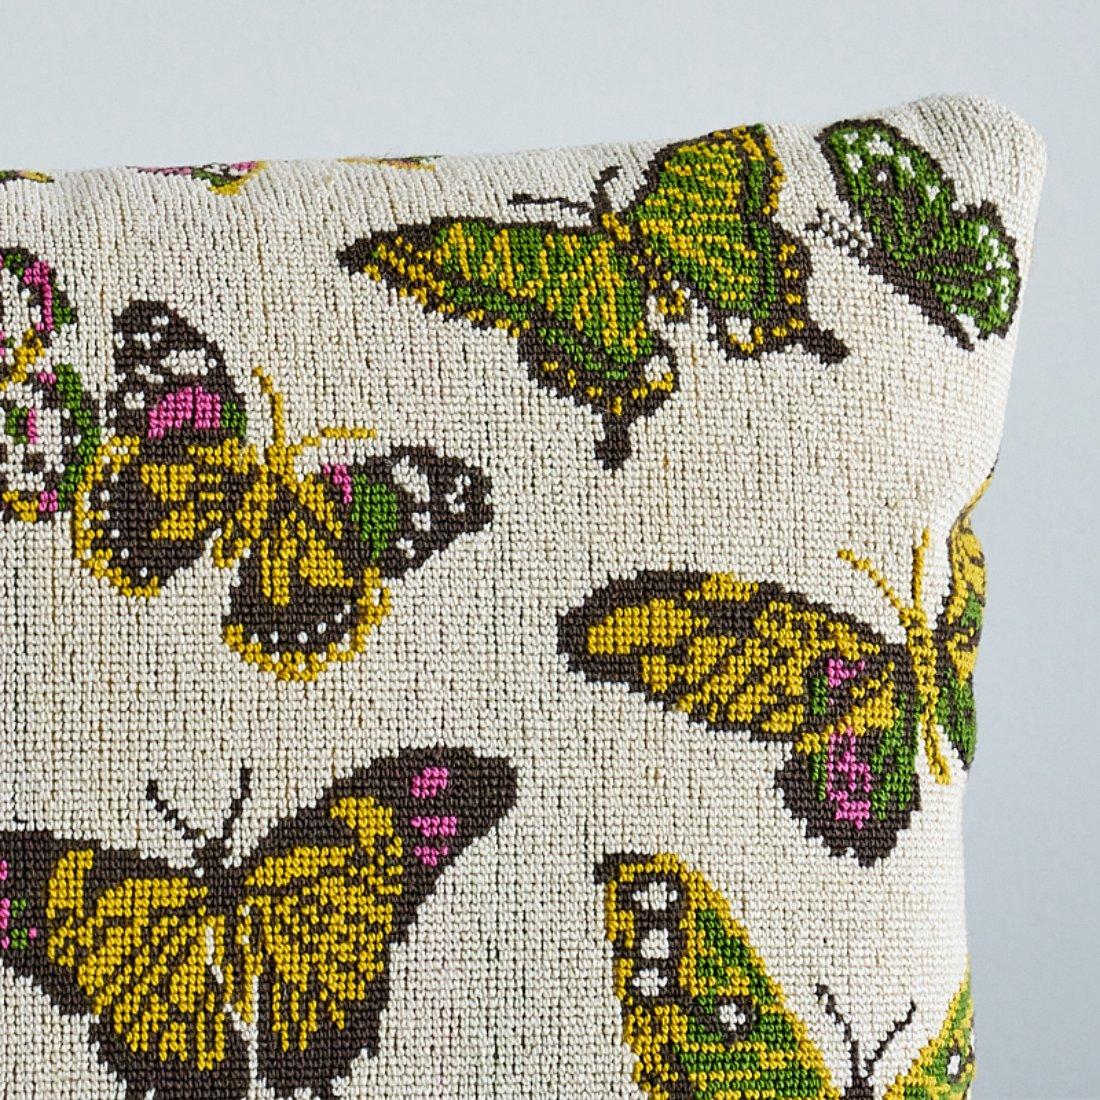 This pillow features Butterfly Epingle with a knife edge finish. A ’70s-fabulous handstitched pillow inspired this hardwearing épinglé, which has the look of a needlepoint and a groovy flower-power color palette. Pillow includes a feather/down fill